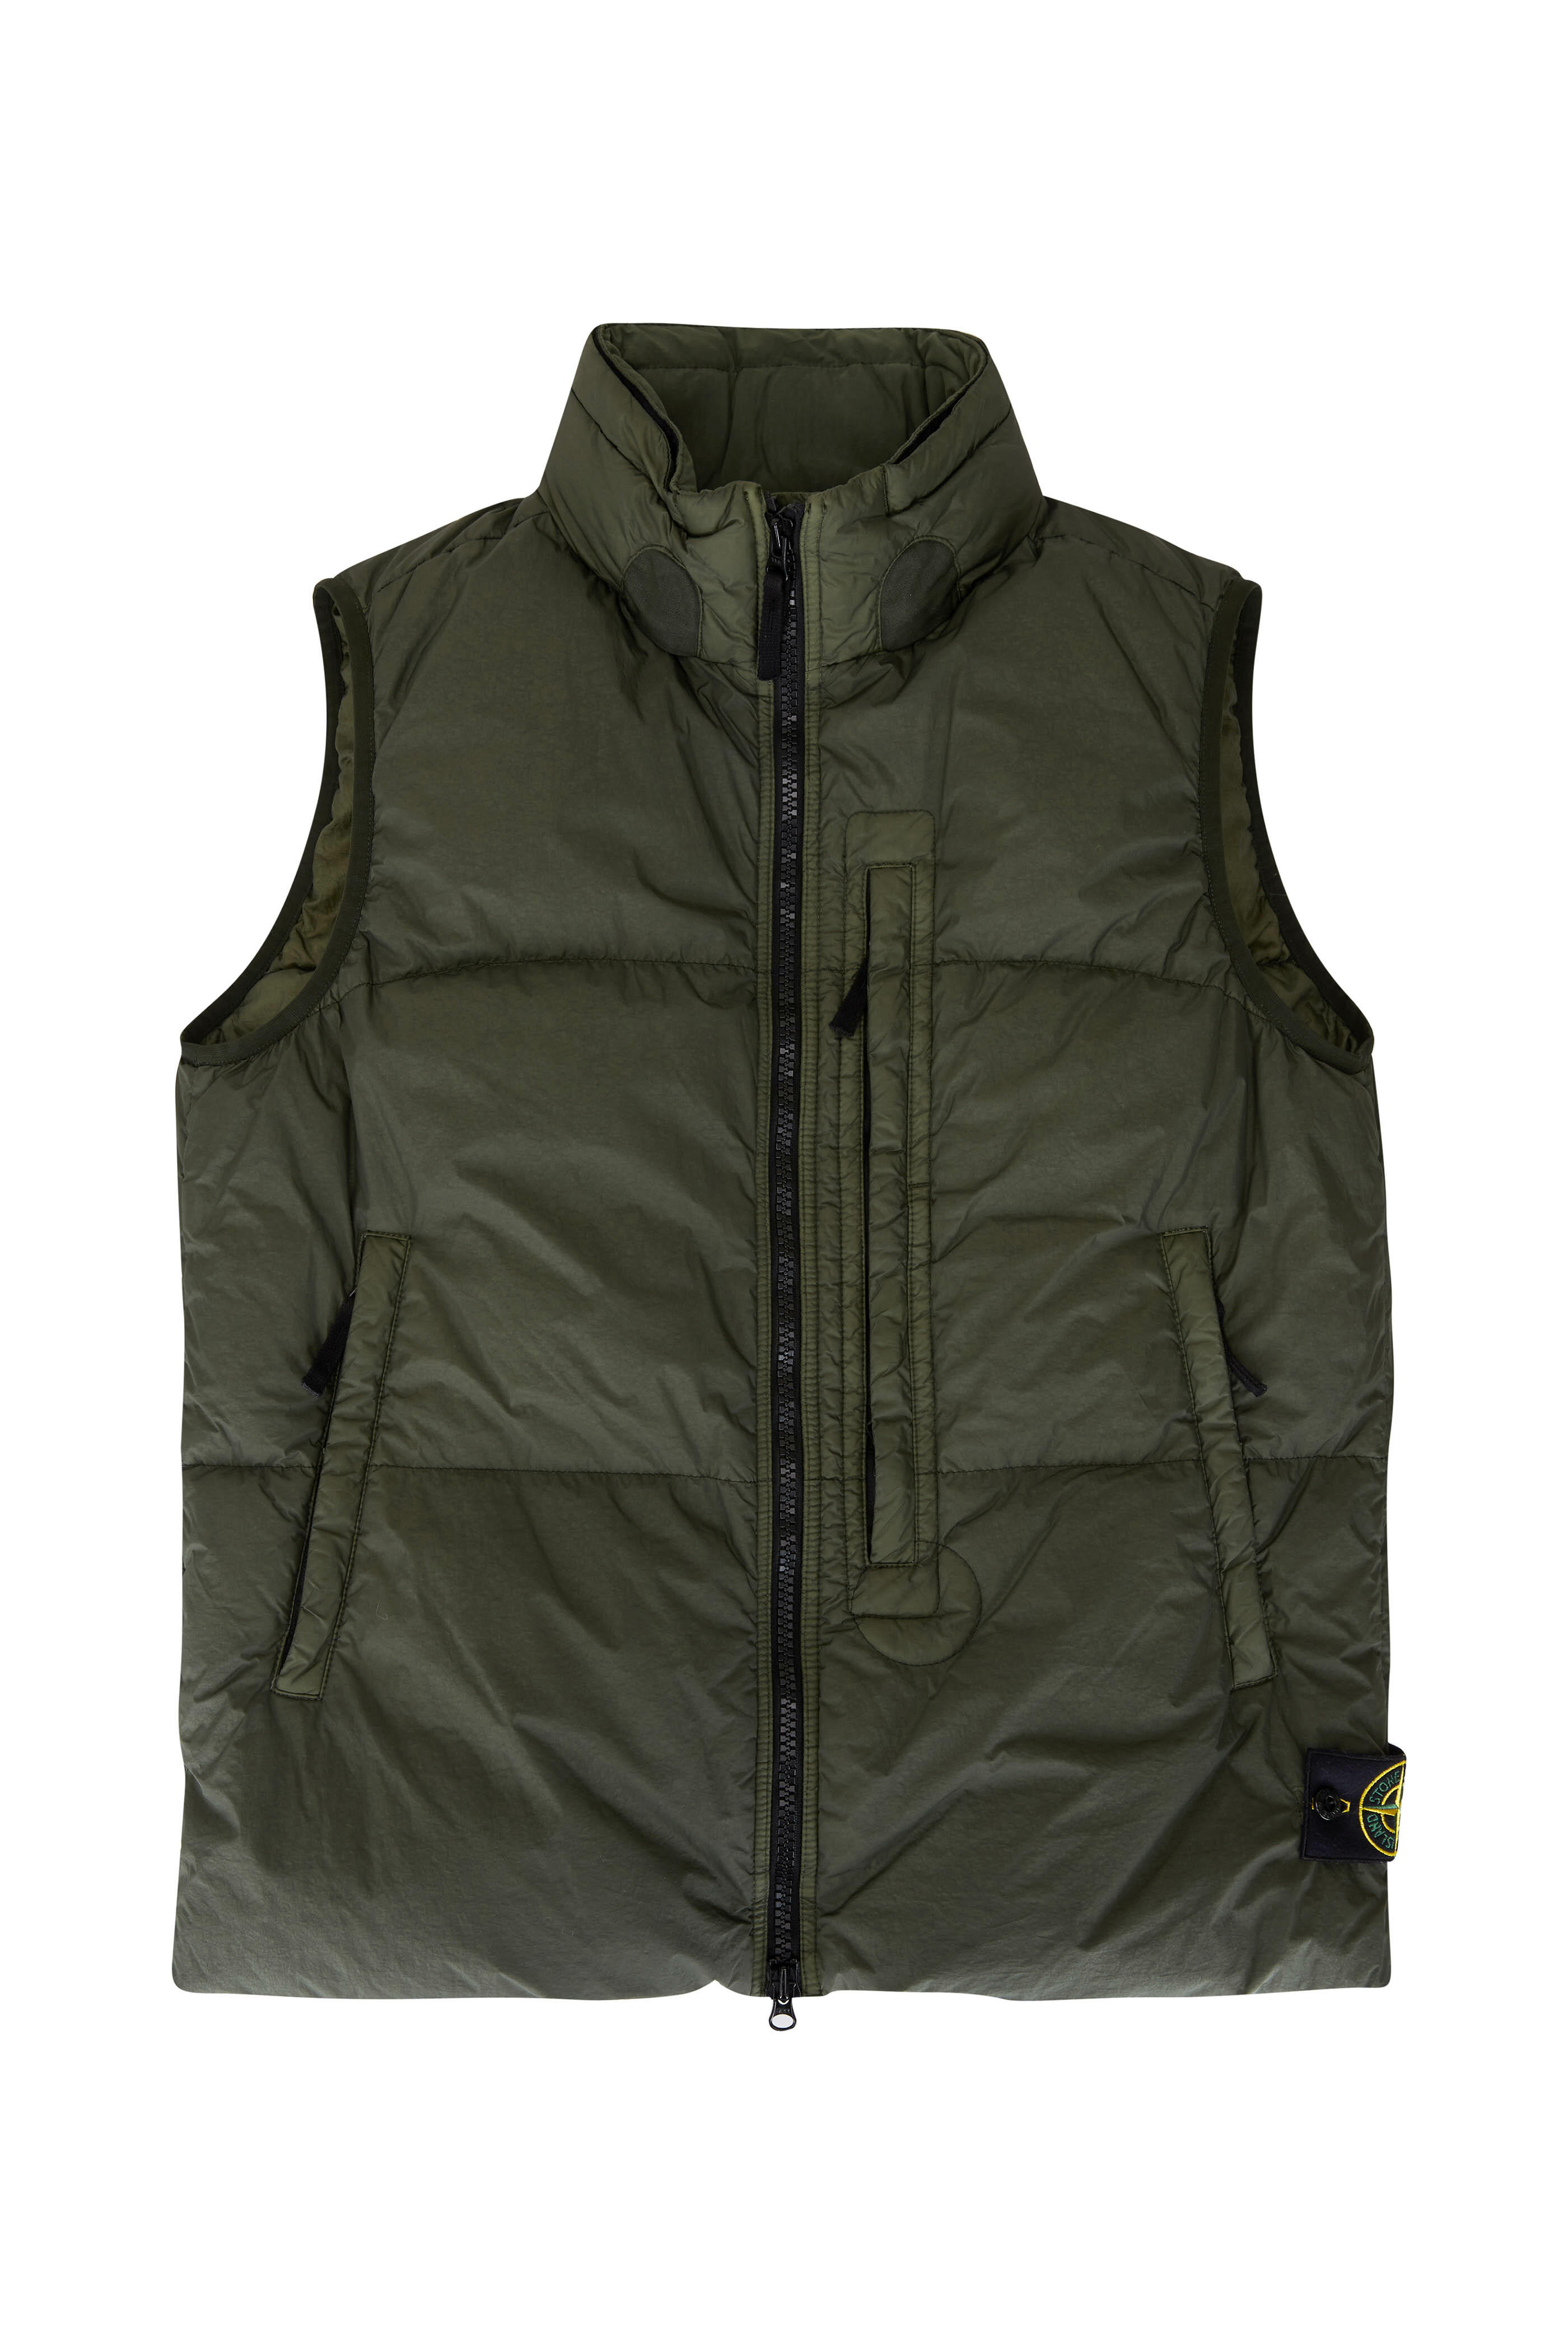 Stone Island - Musk Quilted Down Vest | Mitchell Stores